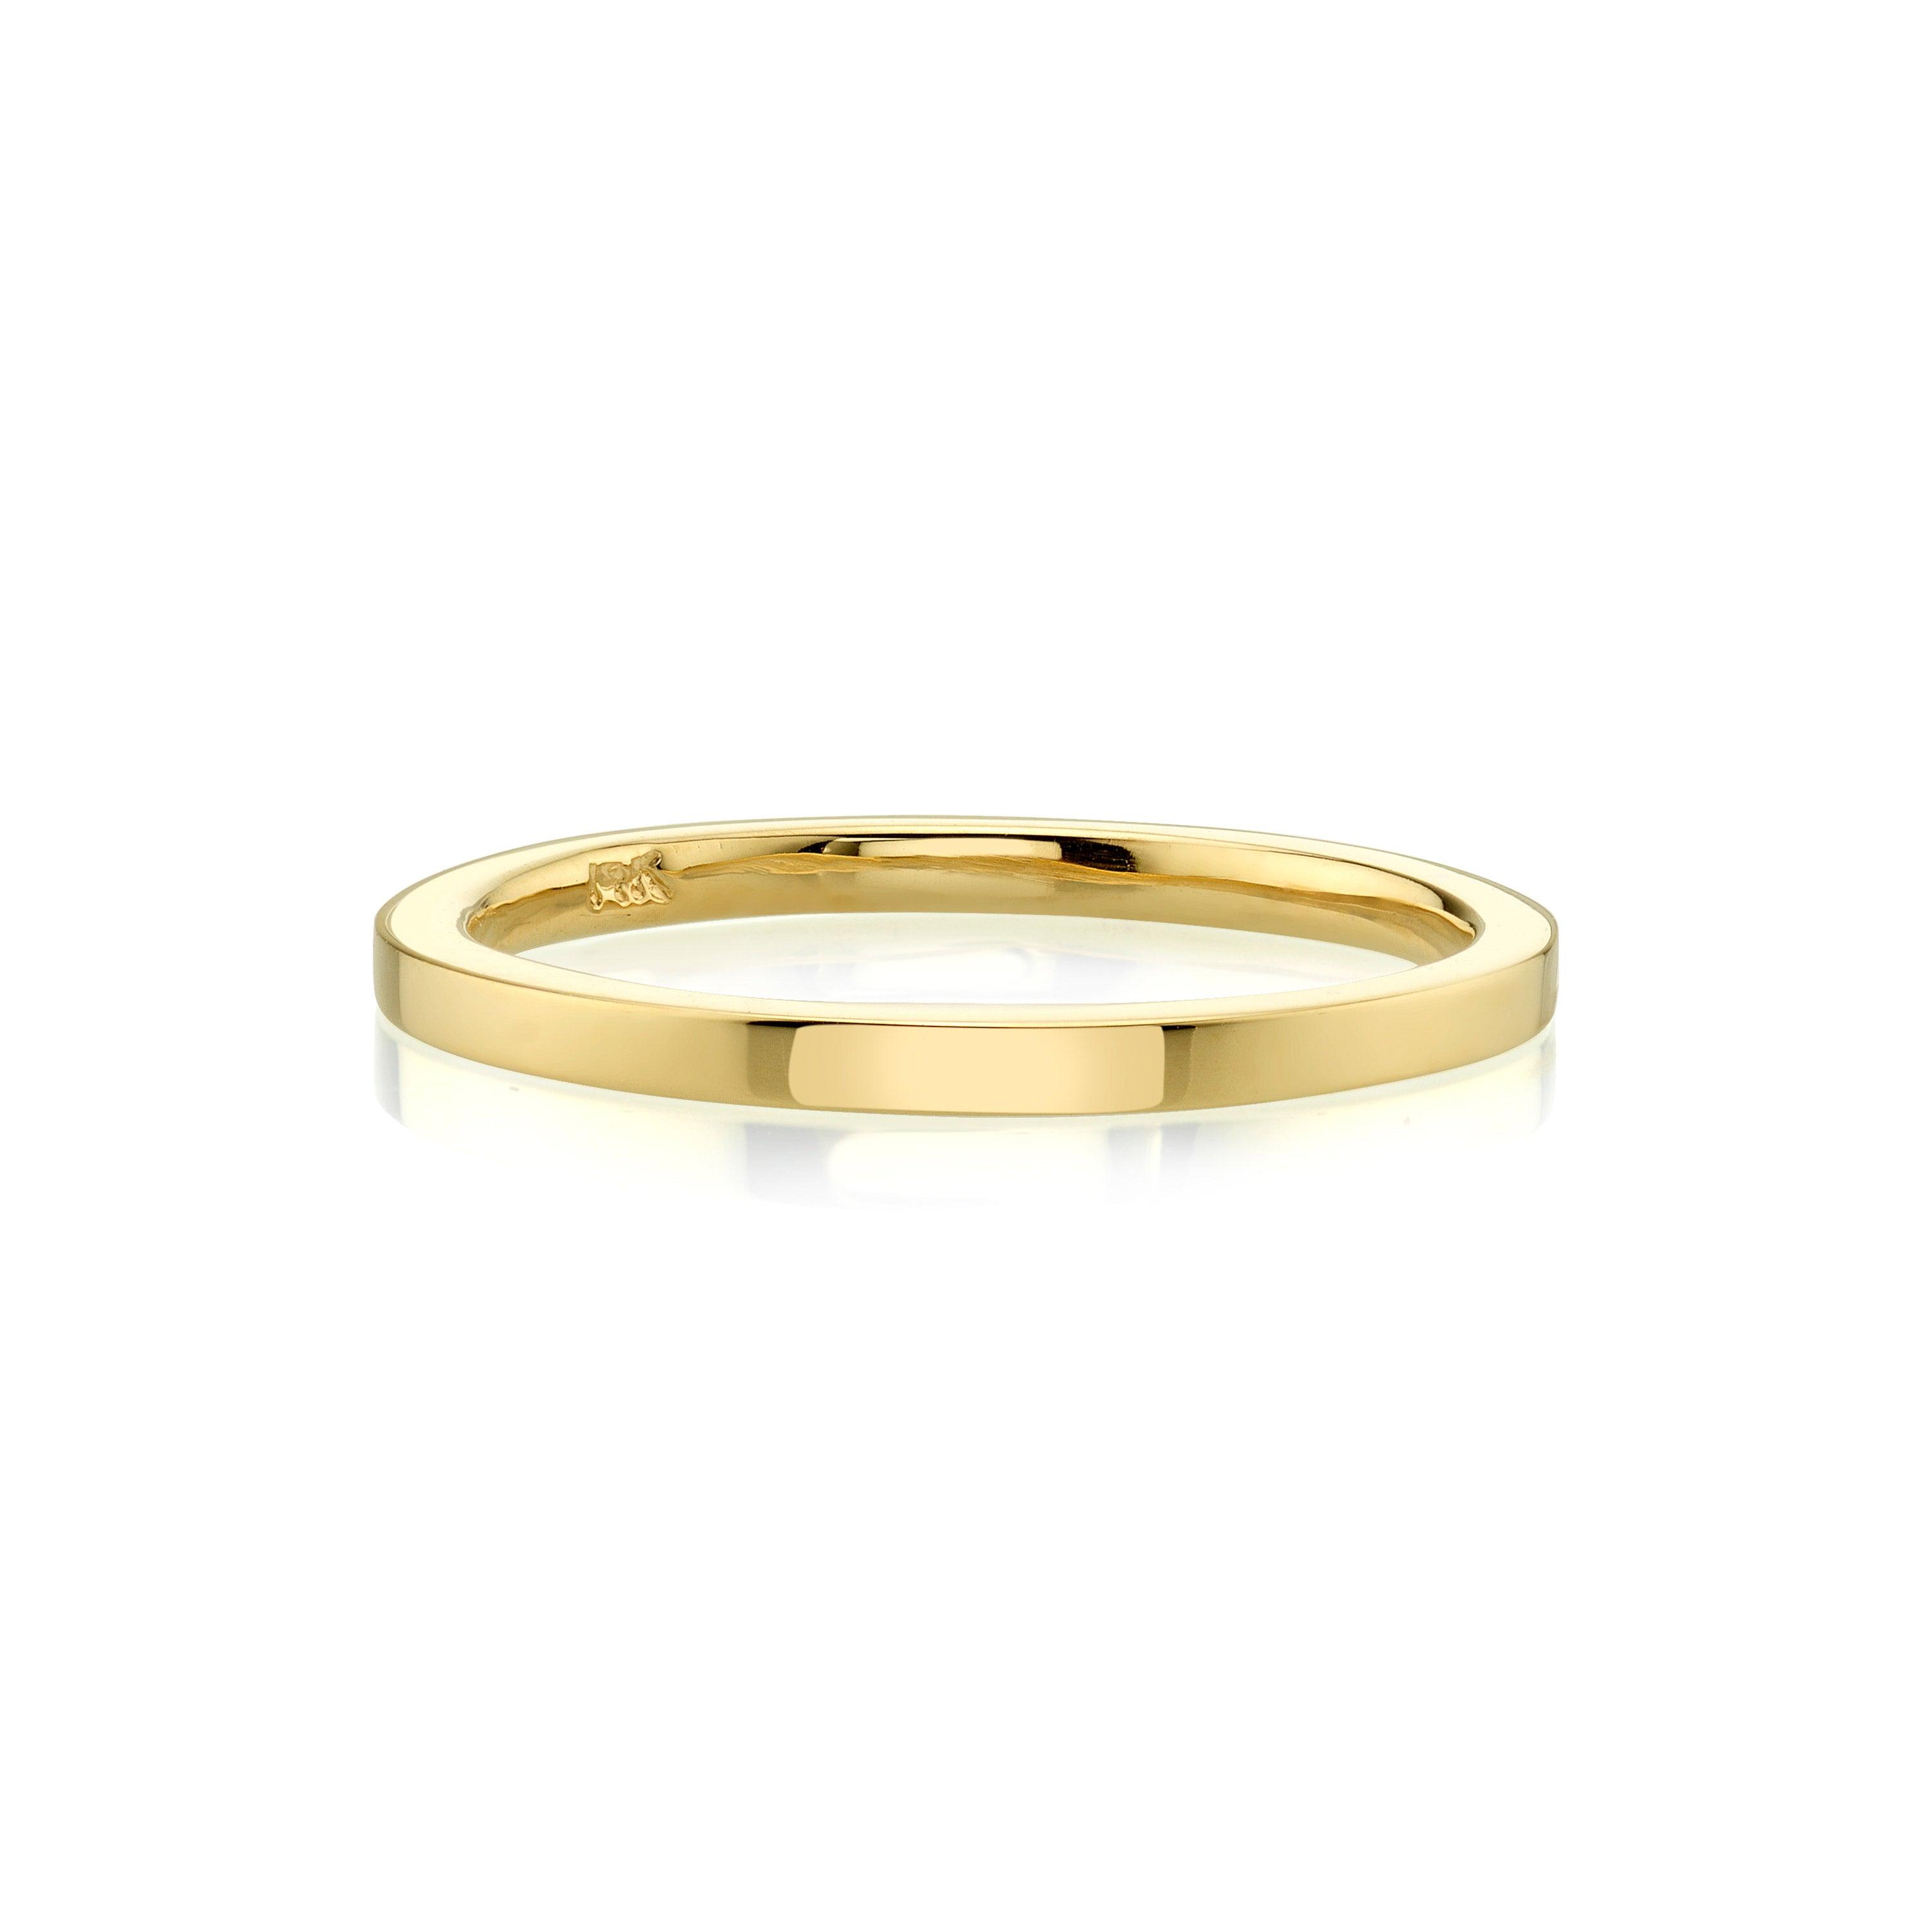 Marrow Fne Jewelry Everyday Thin Simple Stacking Band